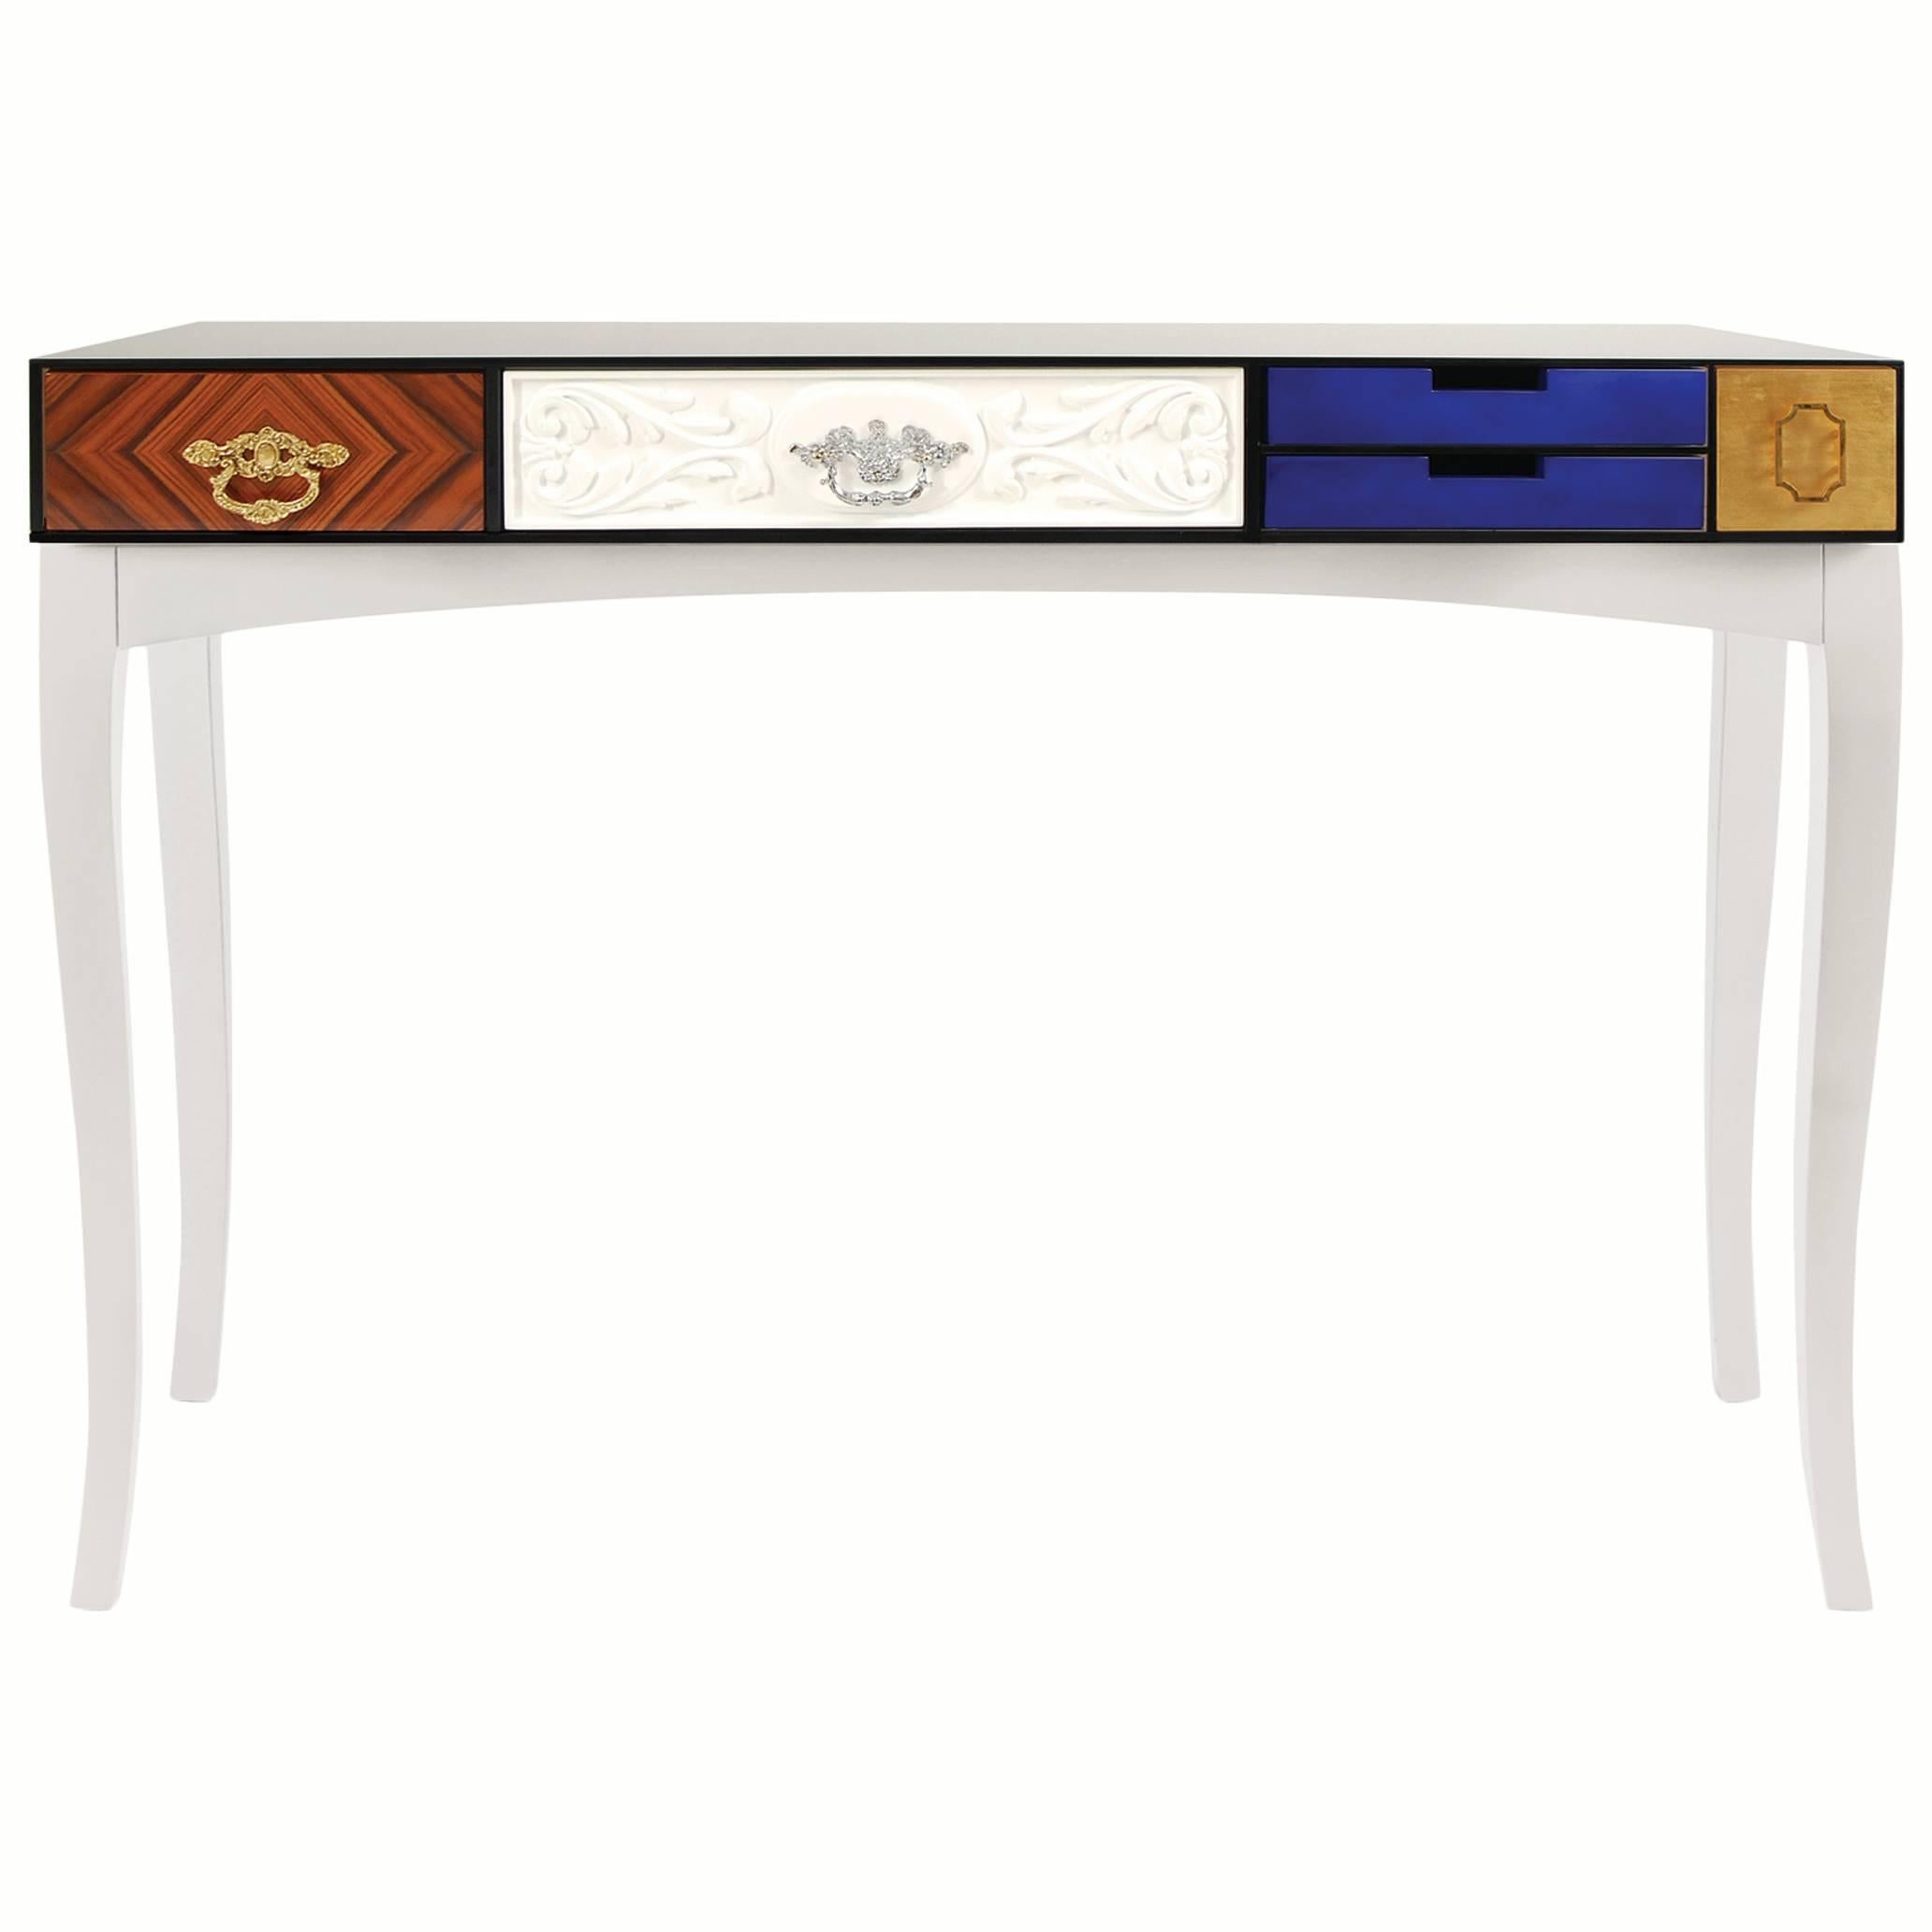 European Modern Five-Drawer Wood, Glass, Lacquered Soho Console by Boca Do Lobo For Sale